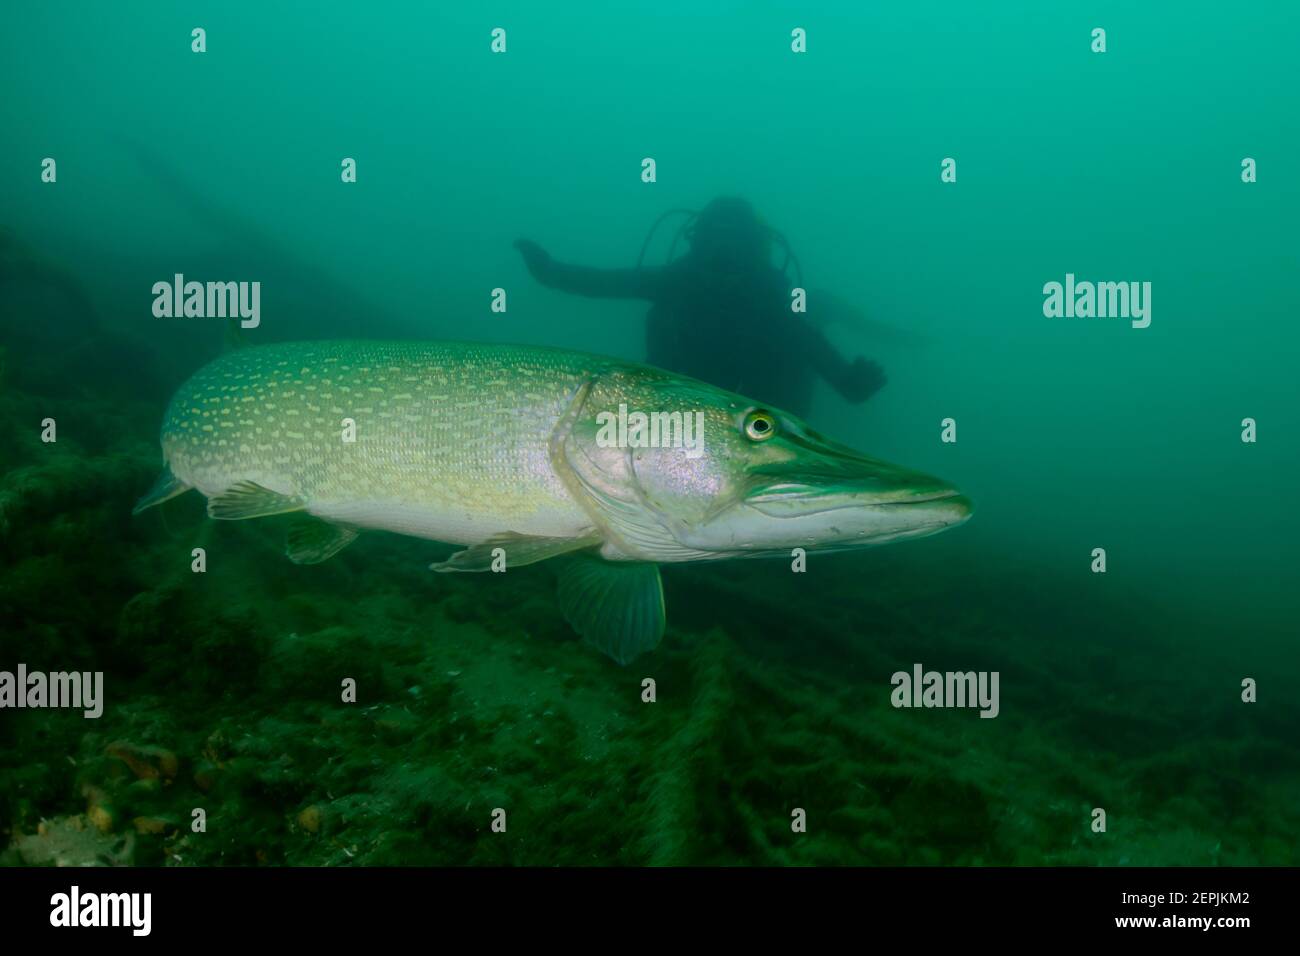 Esox lucius, Northern pike and scuba diver, St. Kanzian am Klopeiner See, Lake Klopein, Austria Stock Photo